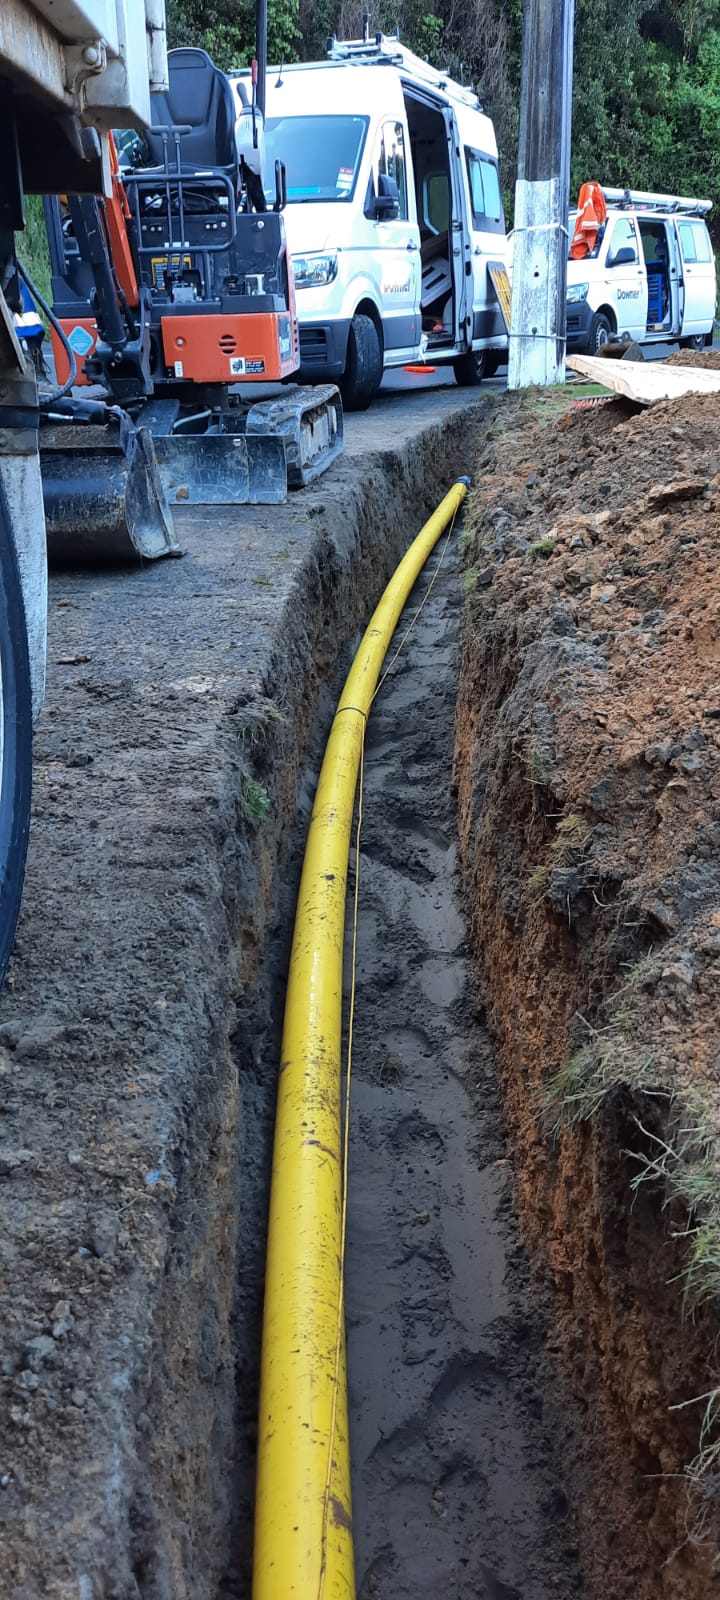 New gas main being installed